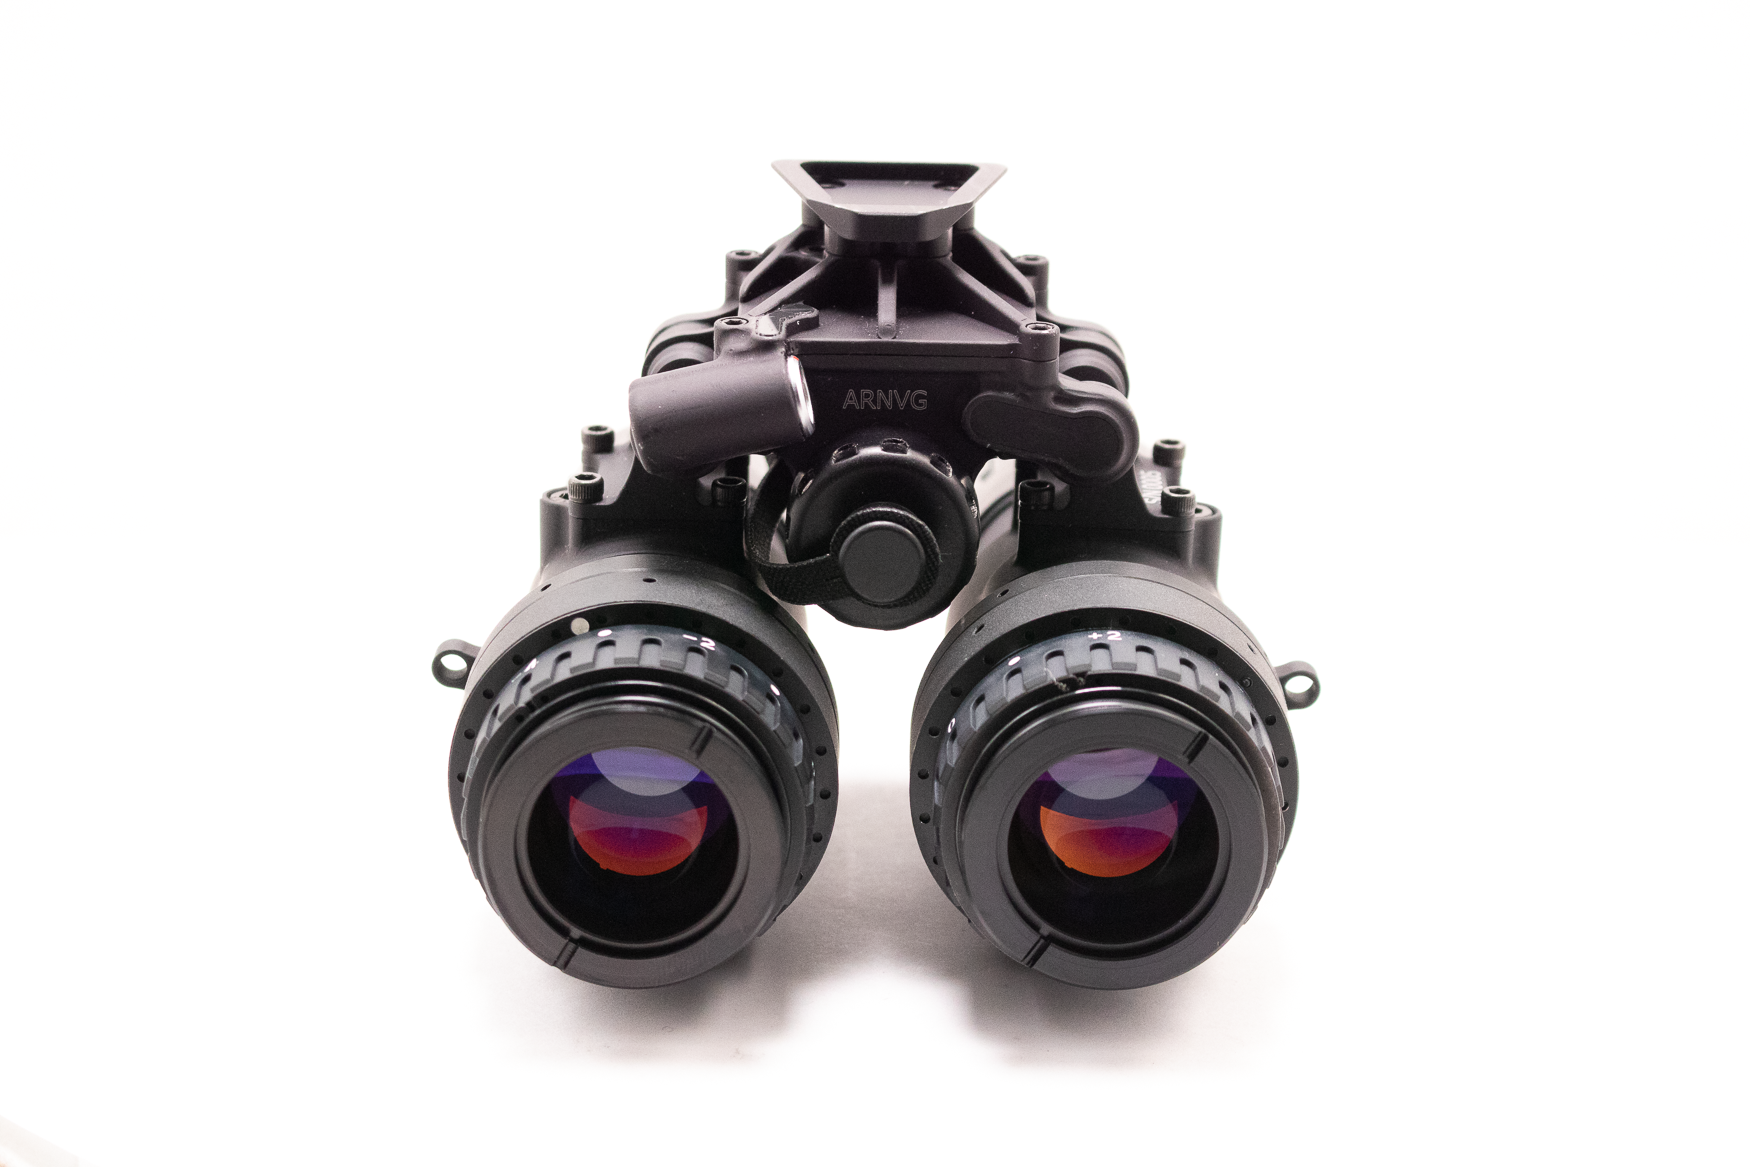 L3 ARNVG SALE - Articulating Ruggedized Night Vision Goggle